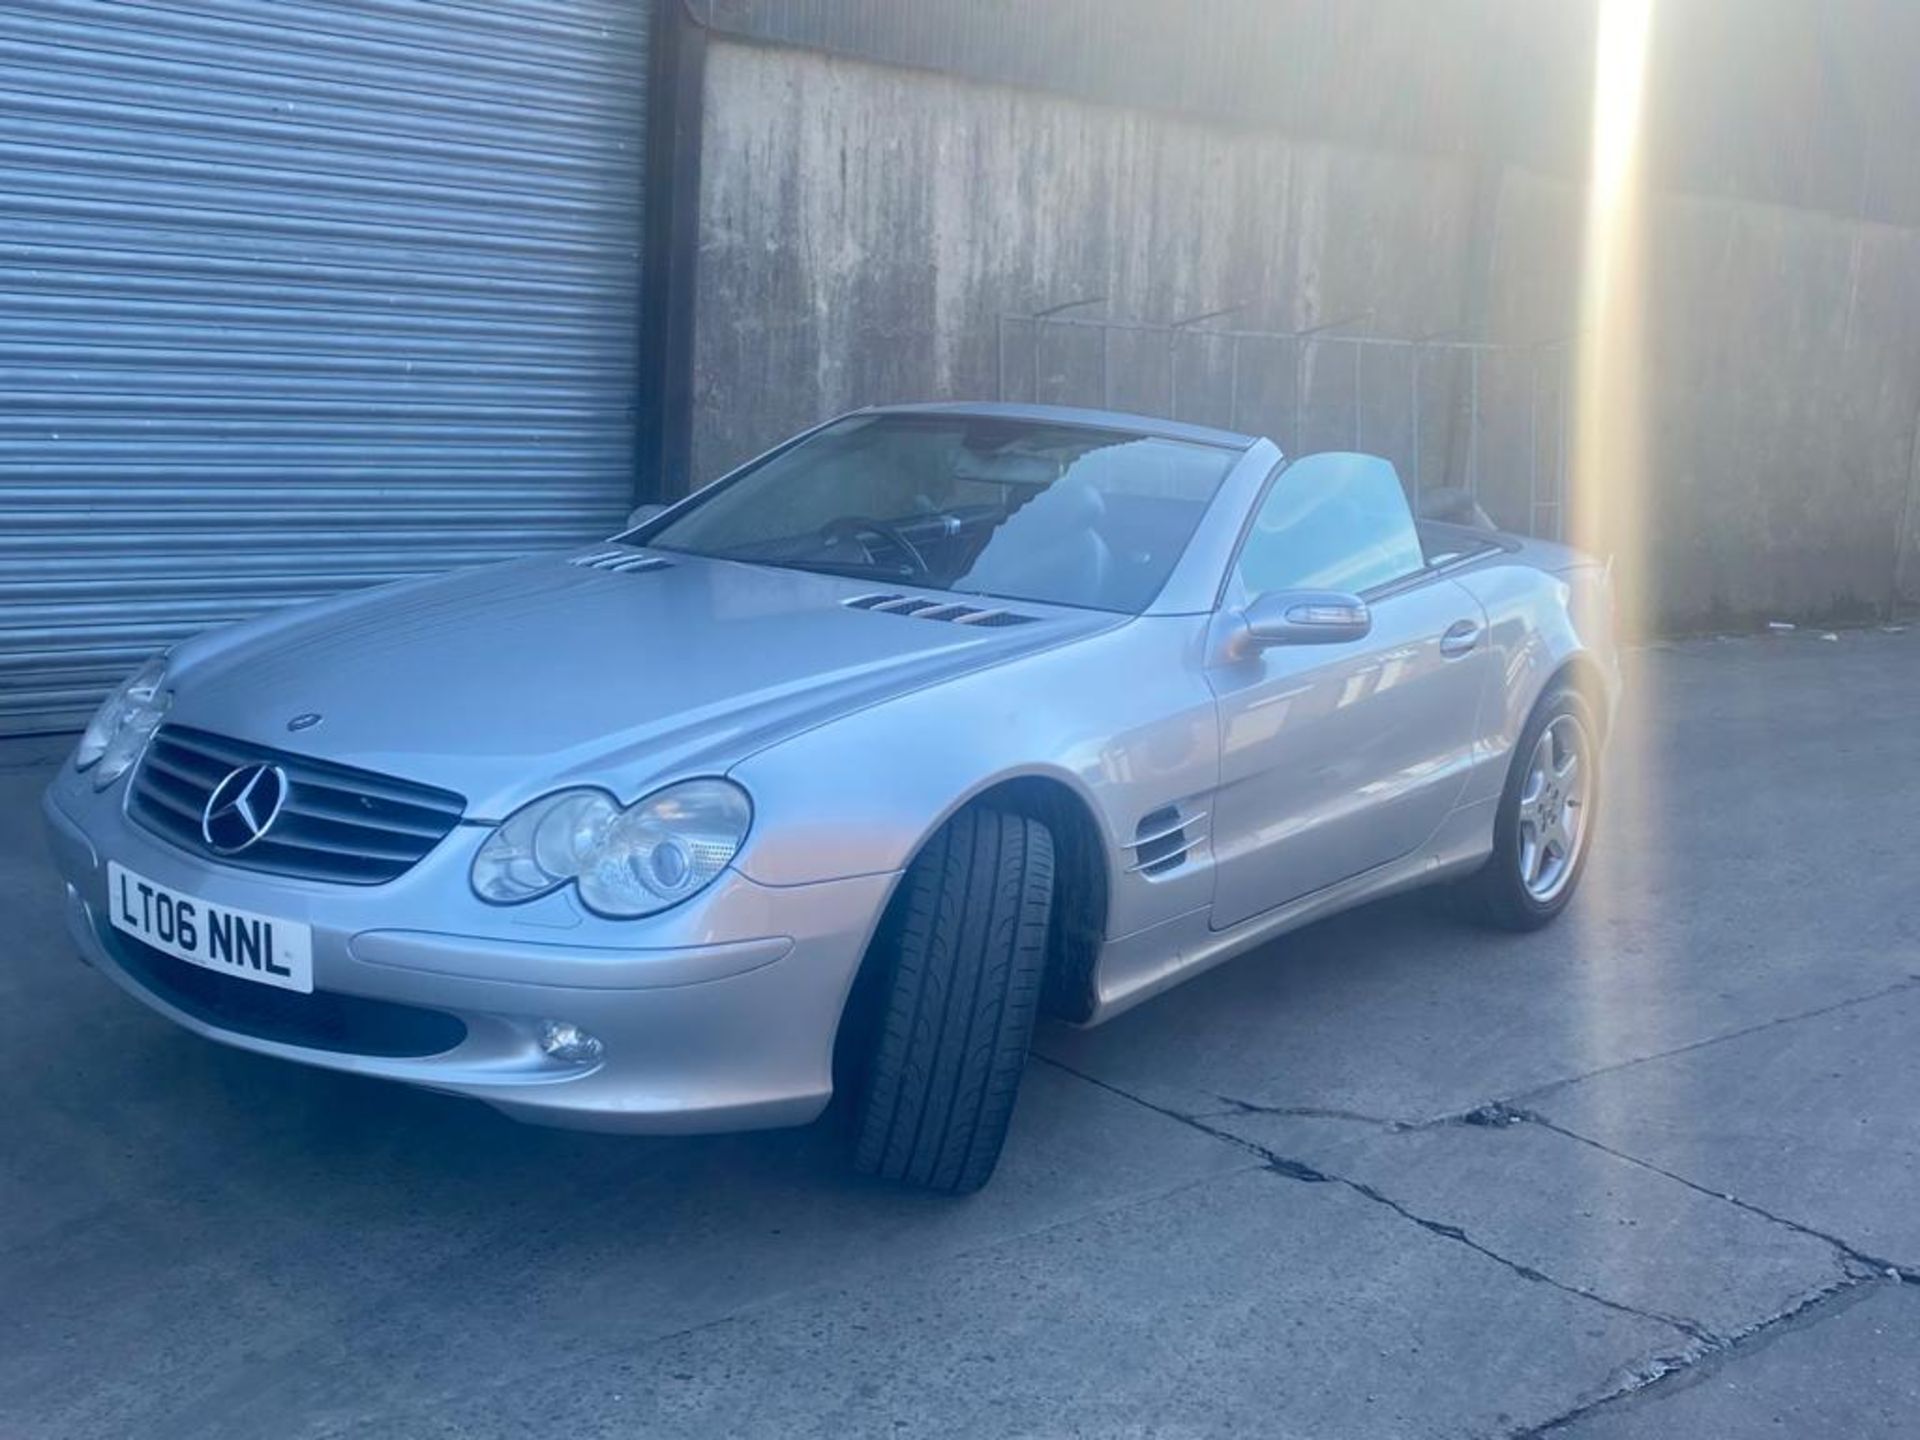 Mercedes convertible 350 SL 2006 - Image 16 of 16